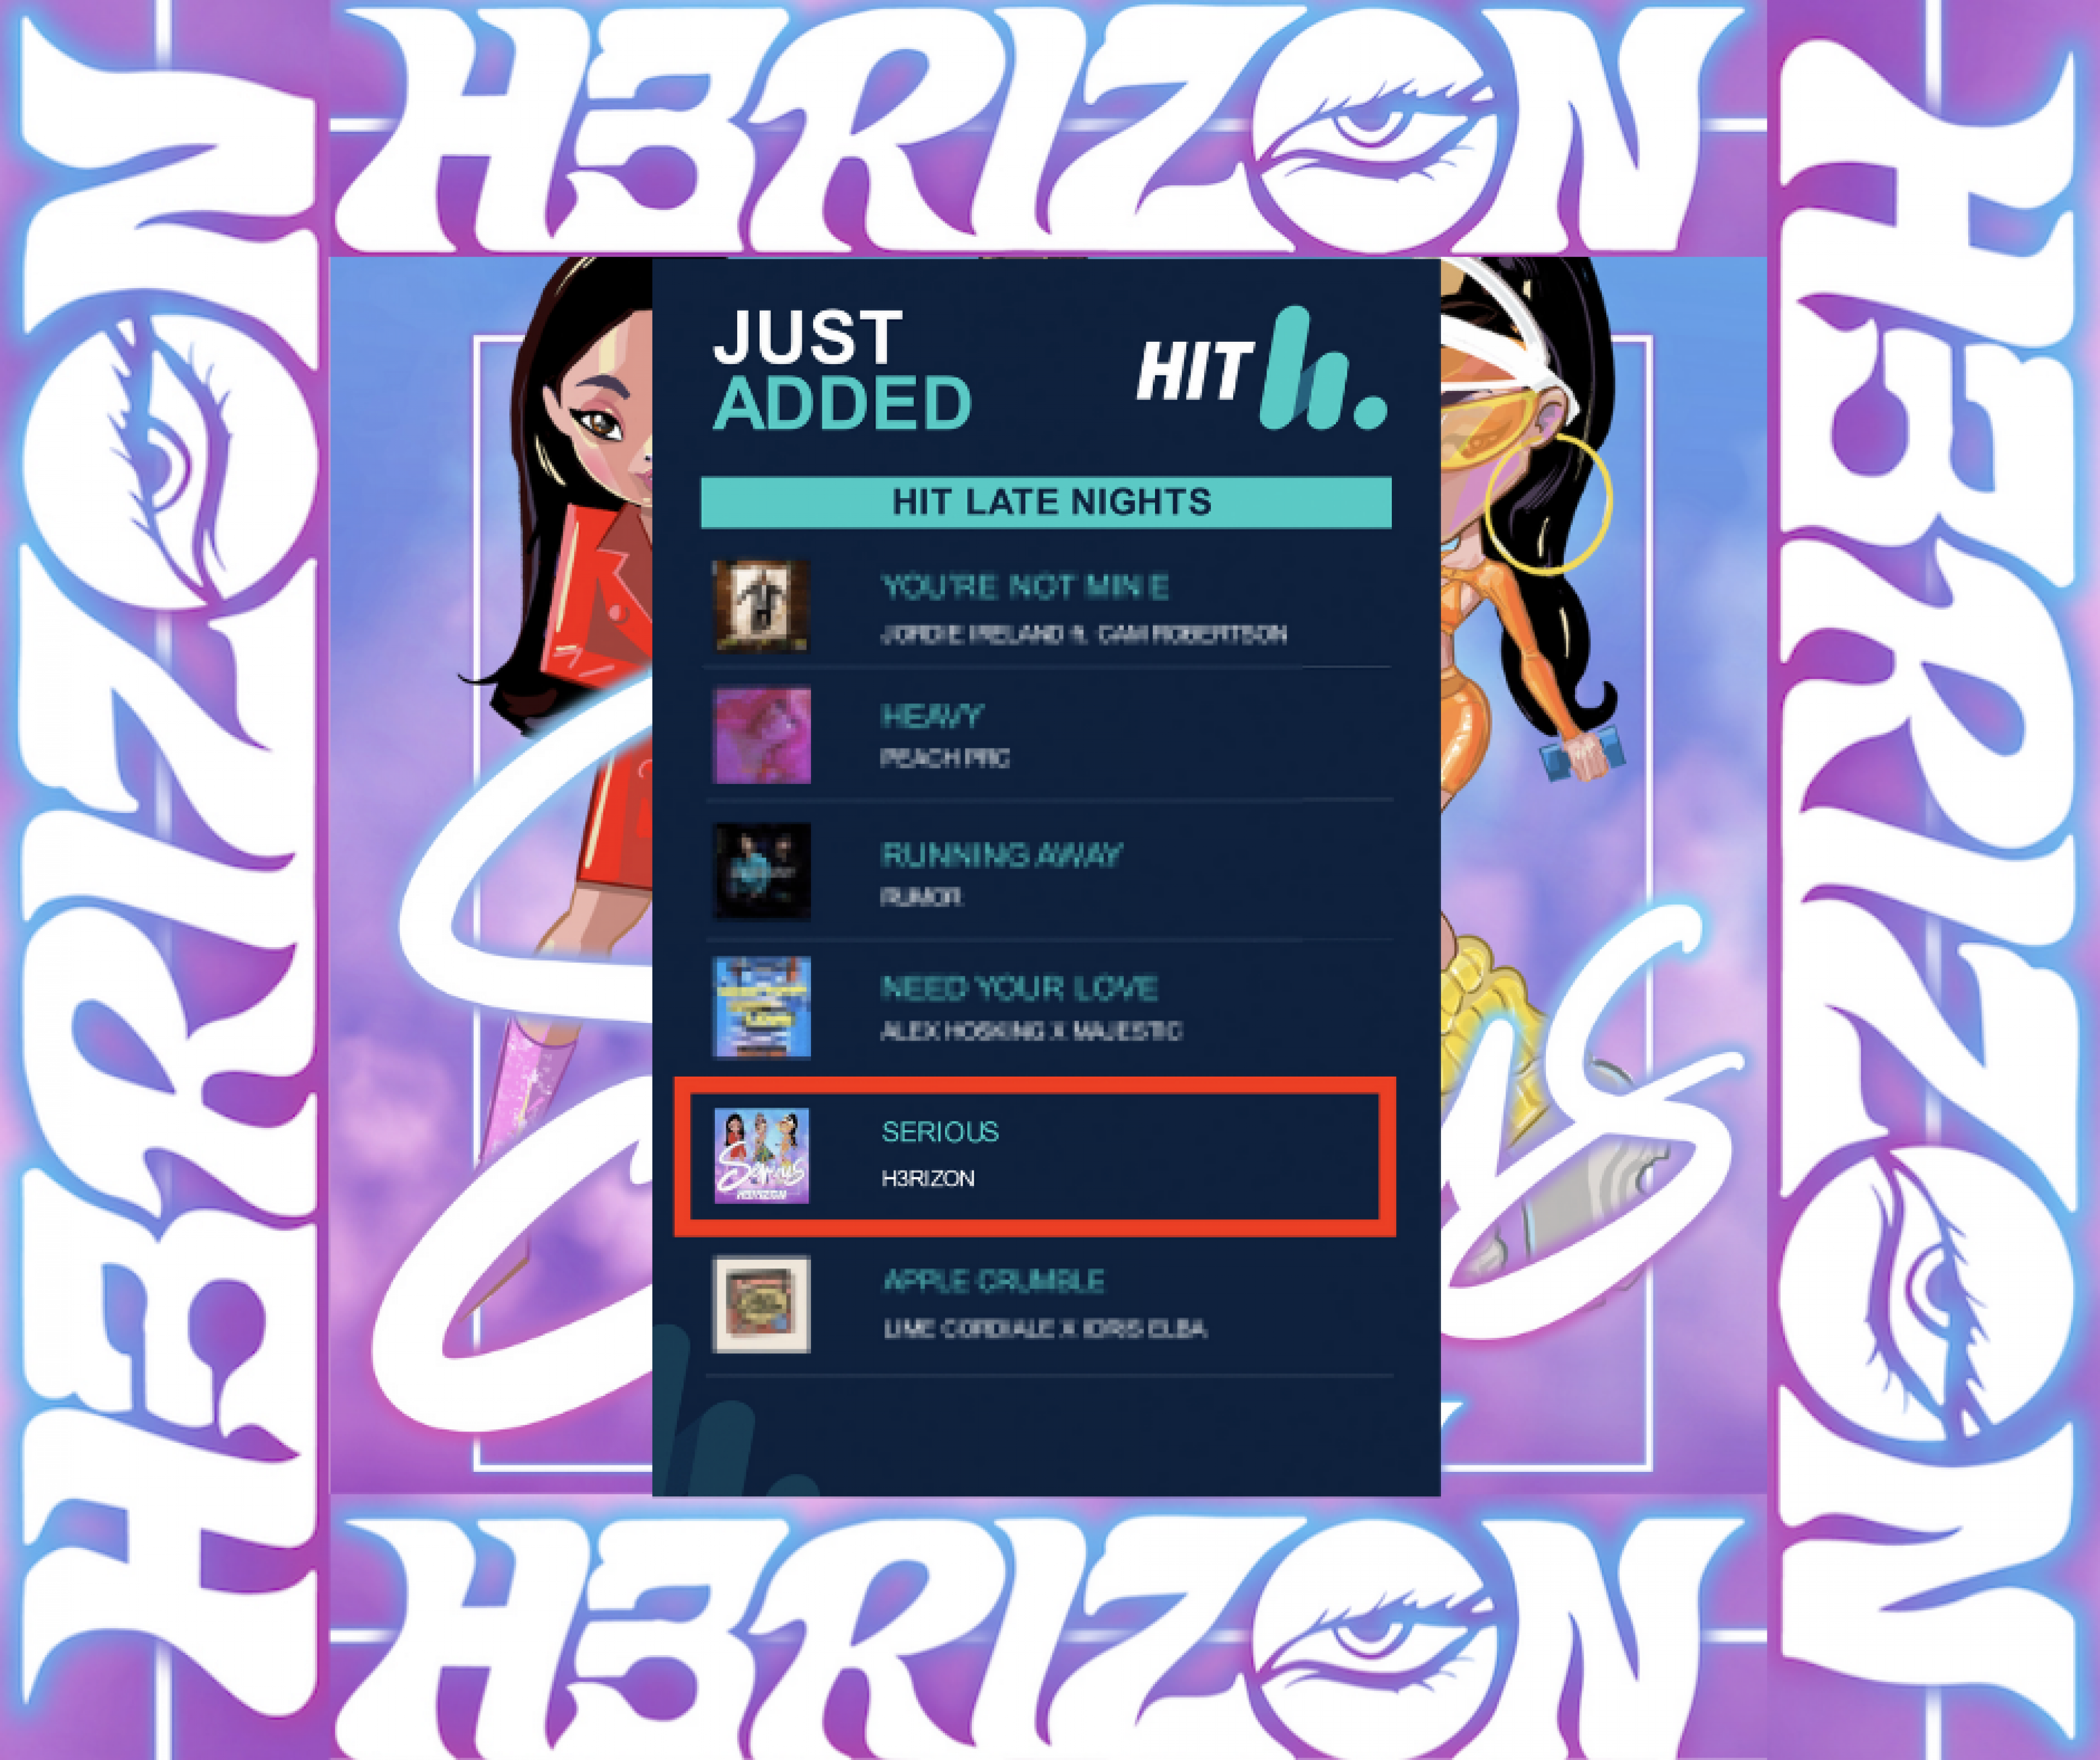 H3rizon - 'Serious' Added to 'Late Nights' on HIT Network